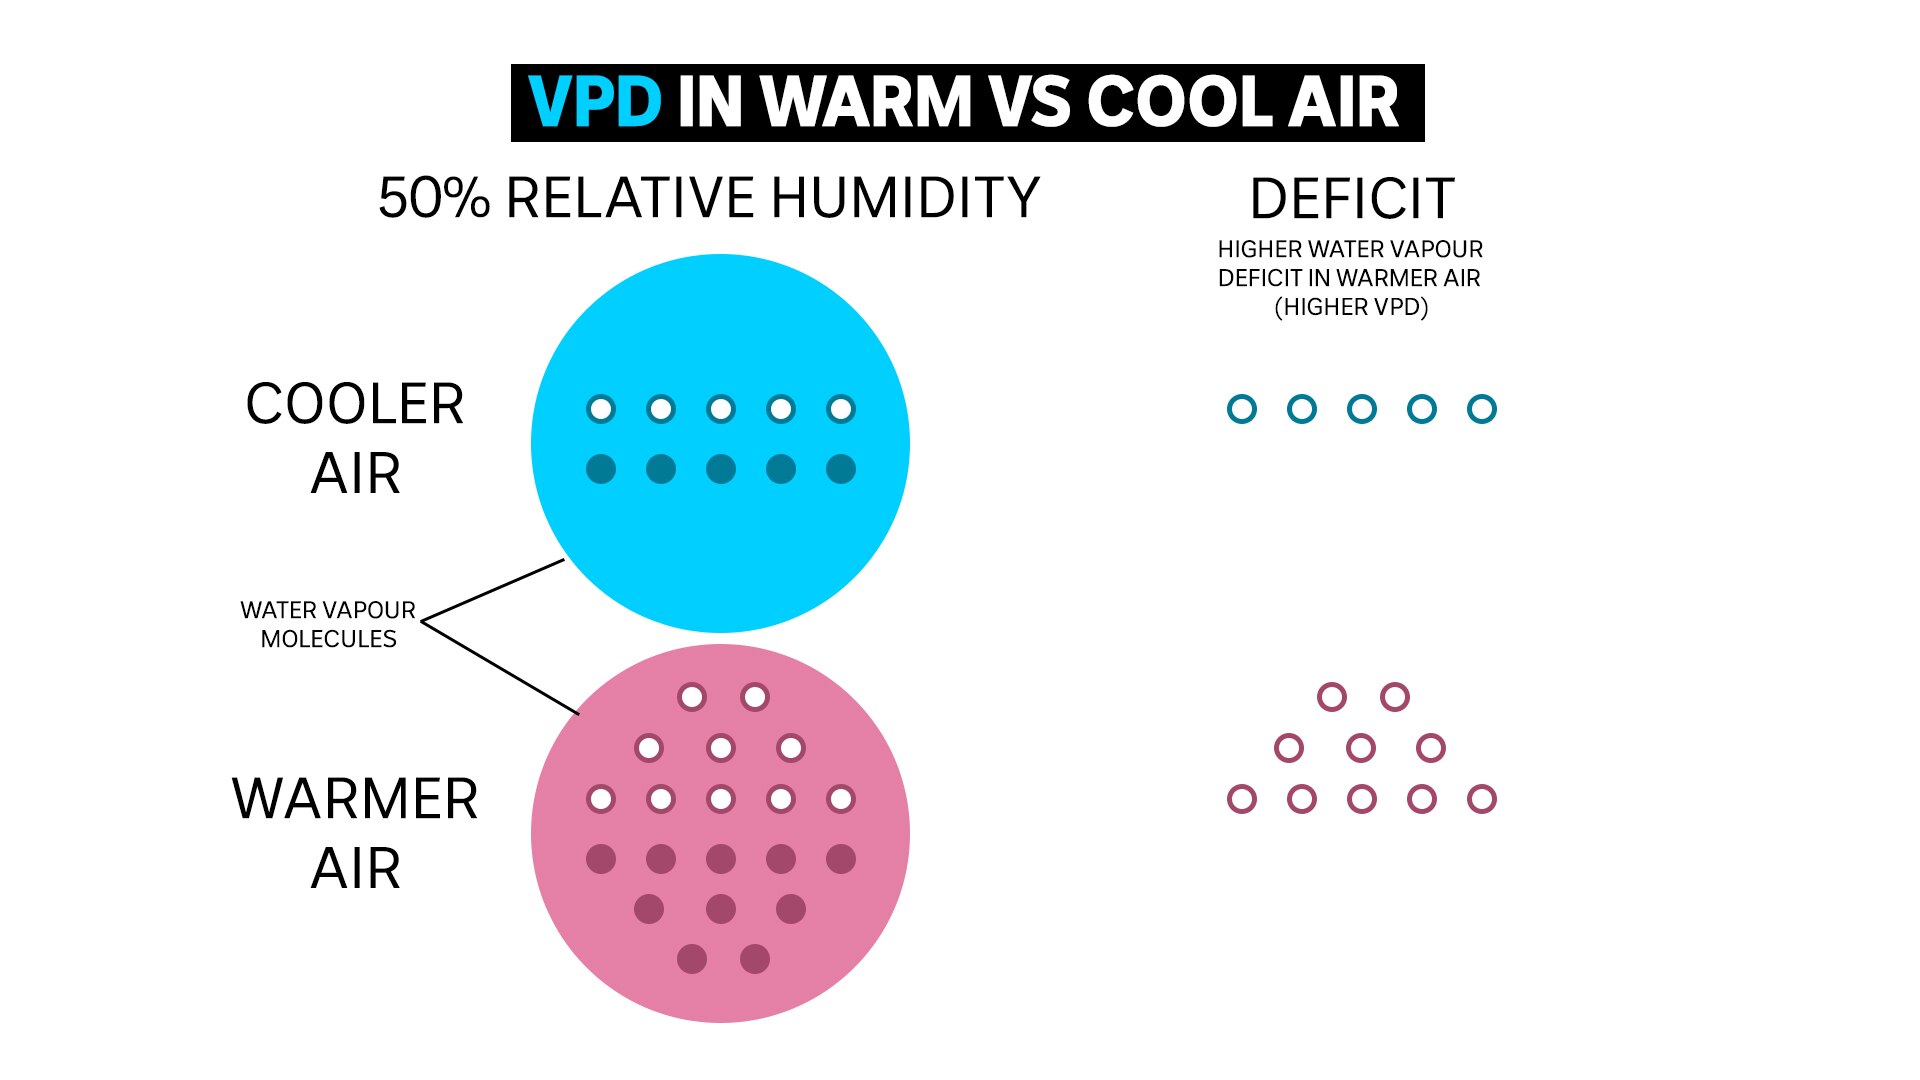 Graphic showing VPD in warm versus cool air